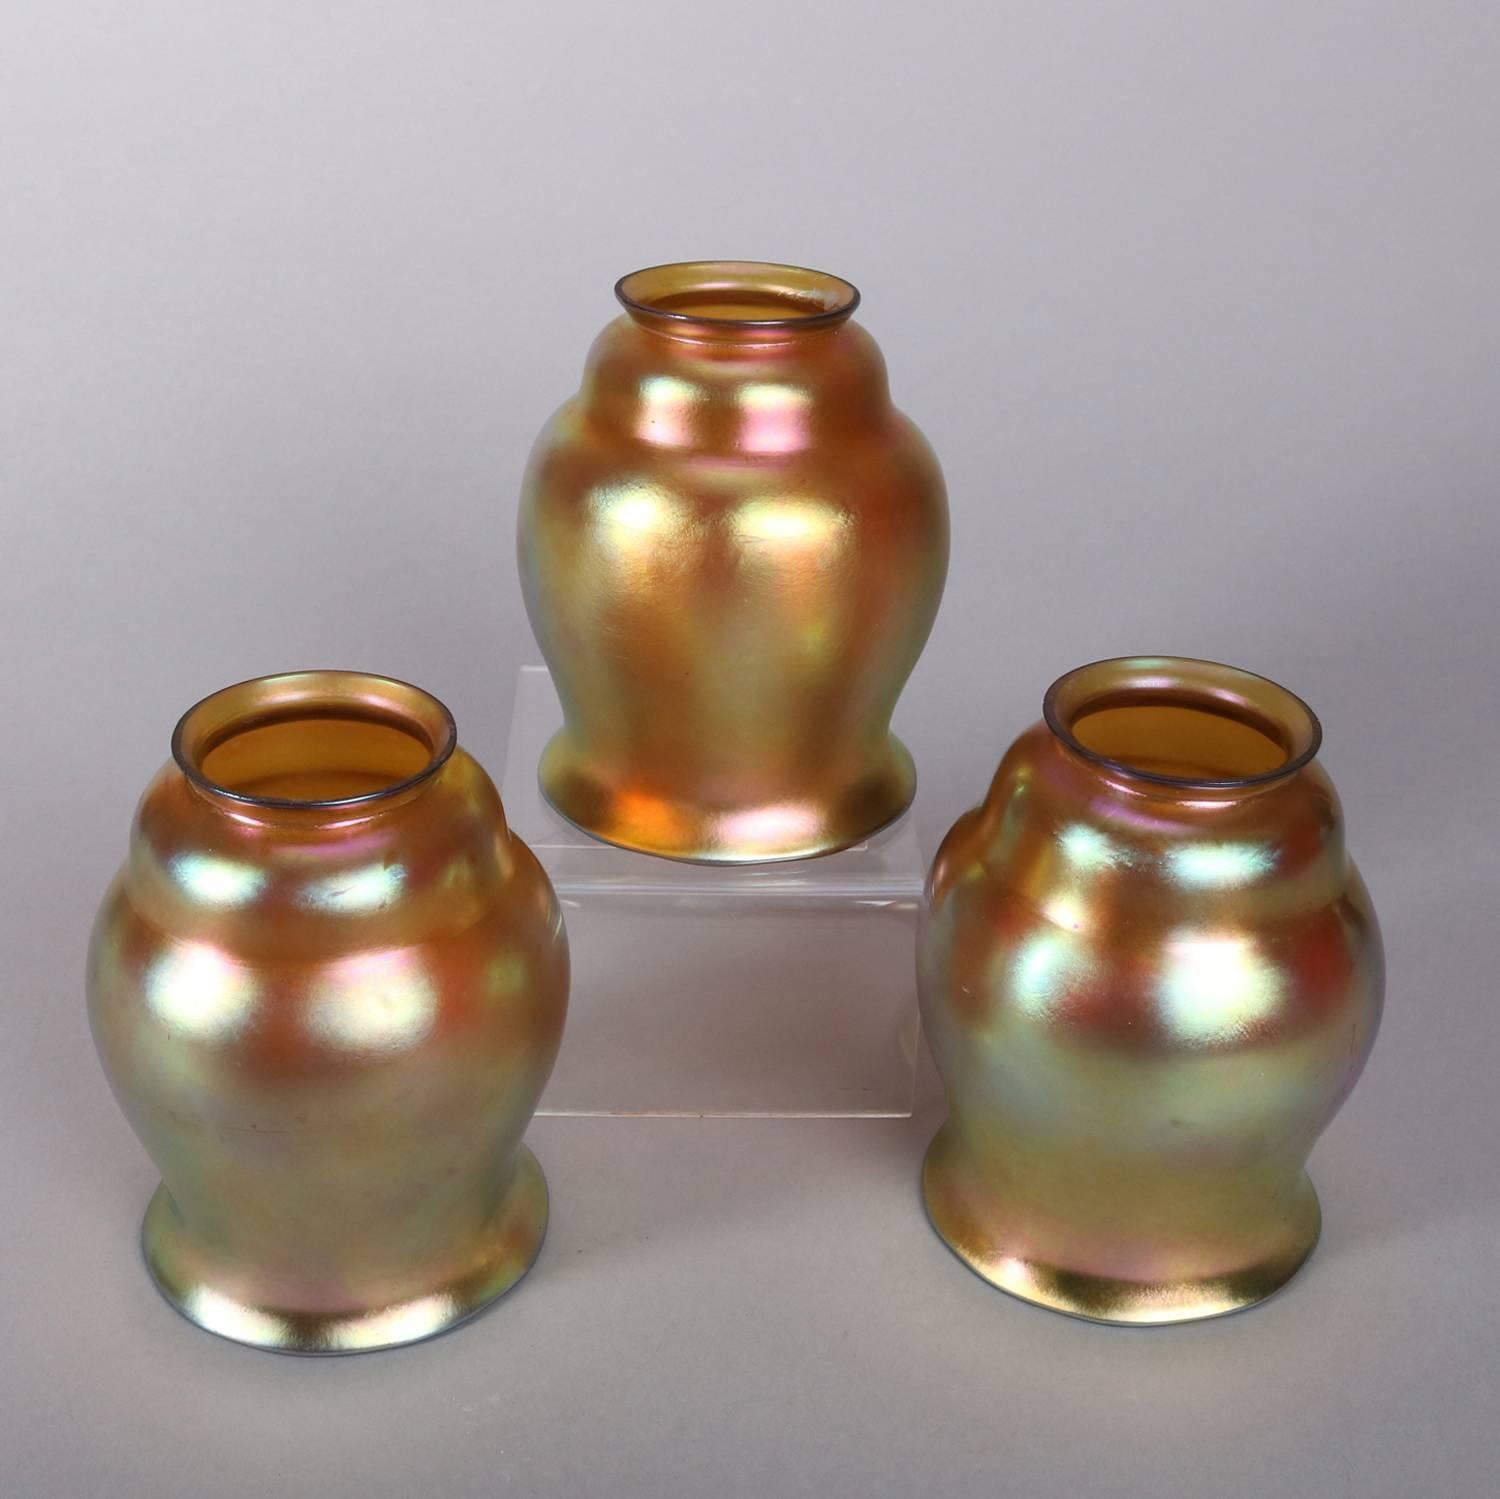 Set of three Arts & Crafts Gold Aurene ovoid form art glass light shades by Steuben, signed, 20th century

Measure: 5